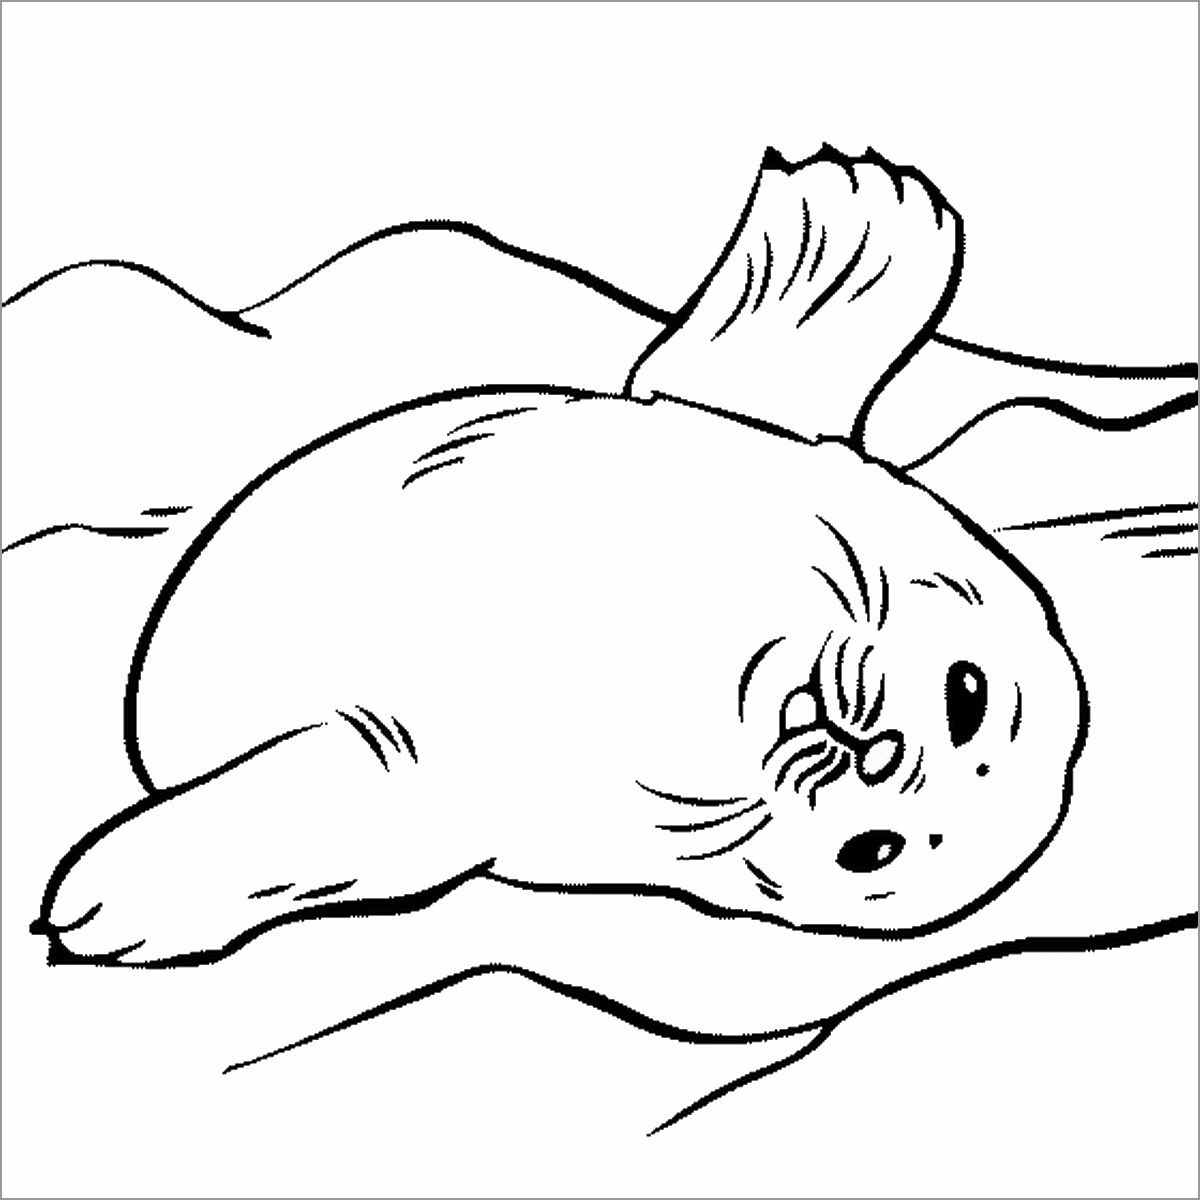 Seal for kids #8